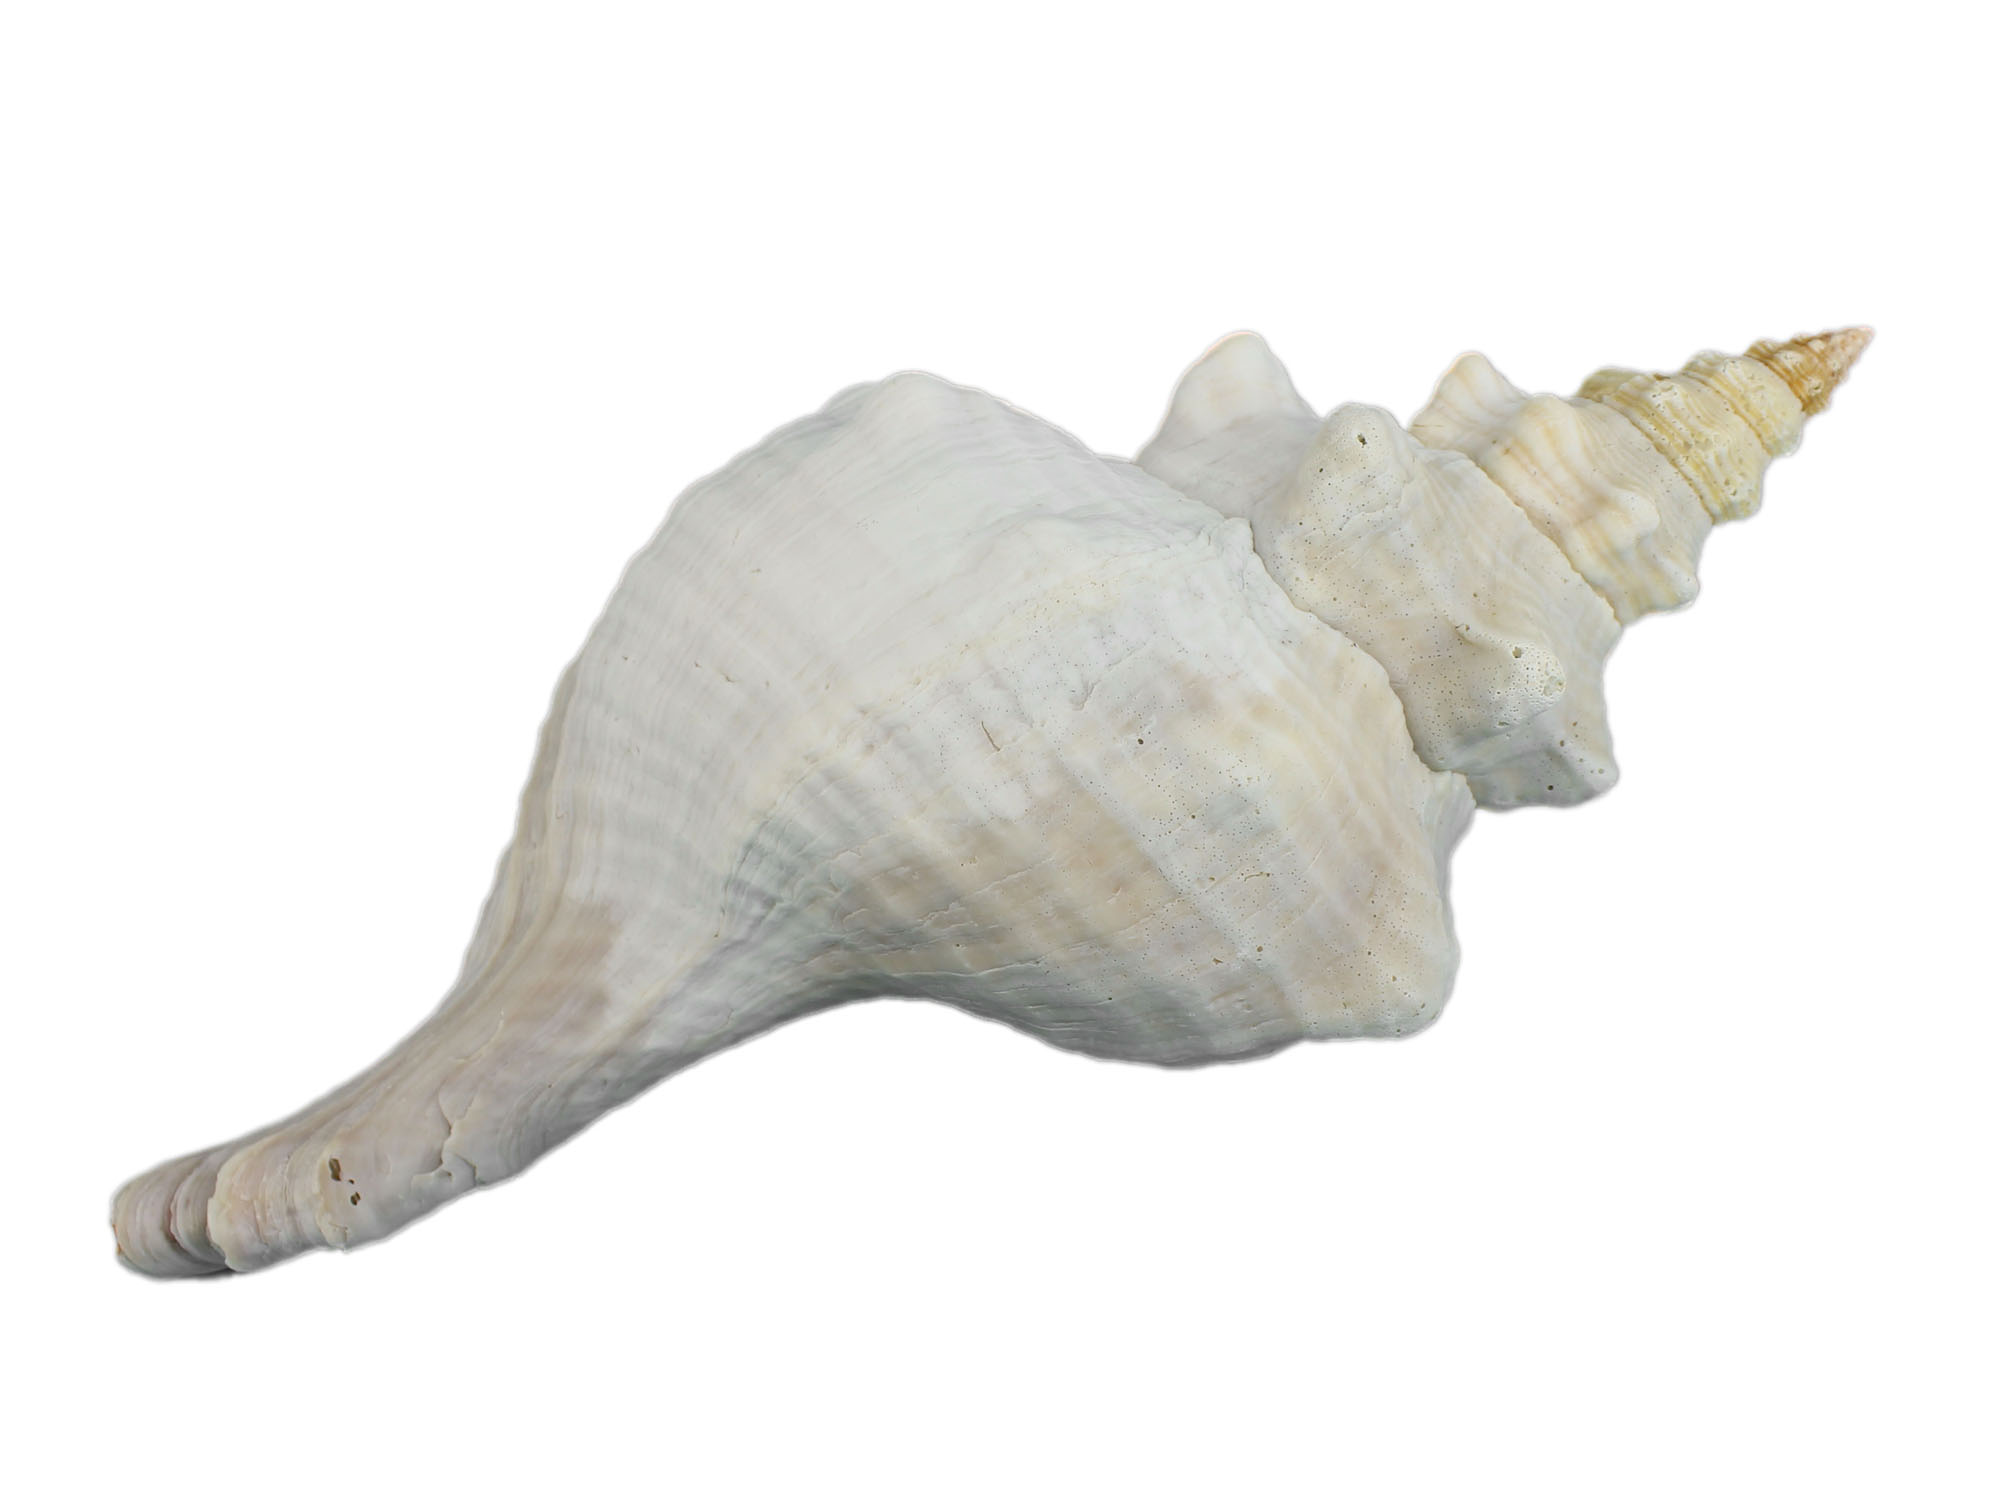 Mexican Horse Conch Shell: 13" to 14" Florida horse conch, sea snail shell